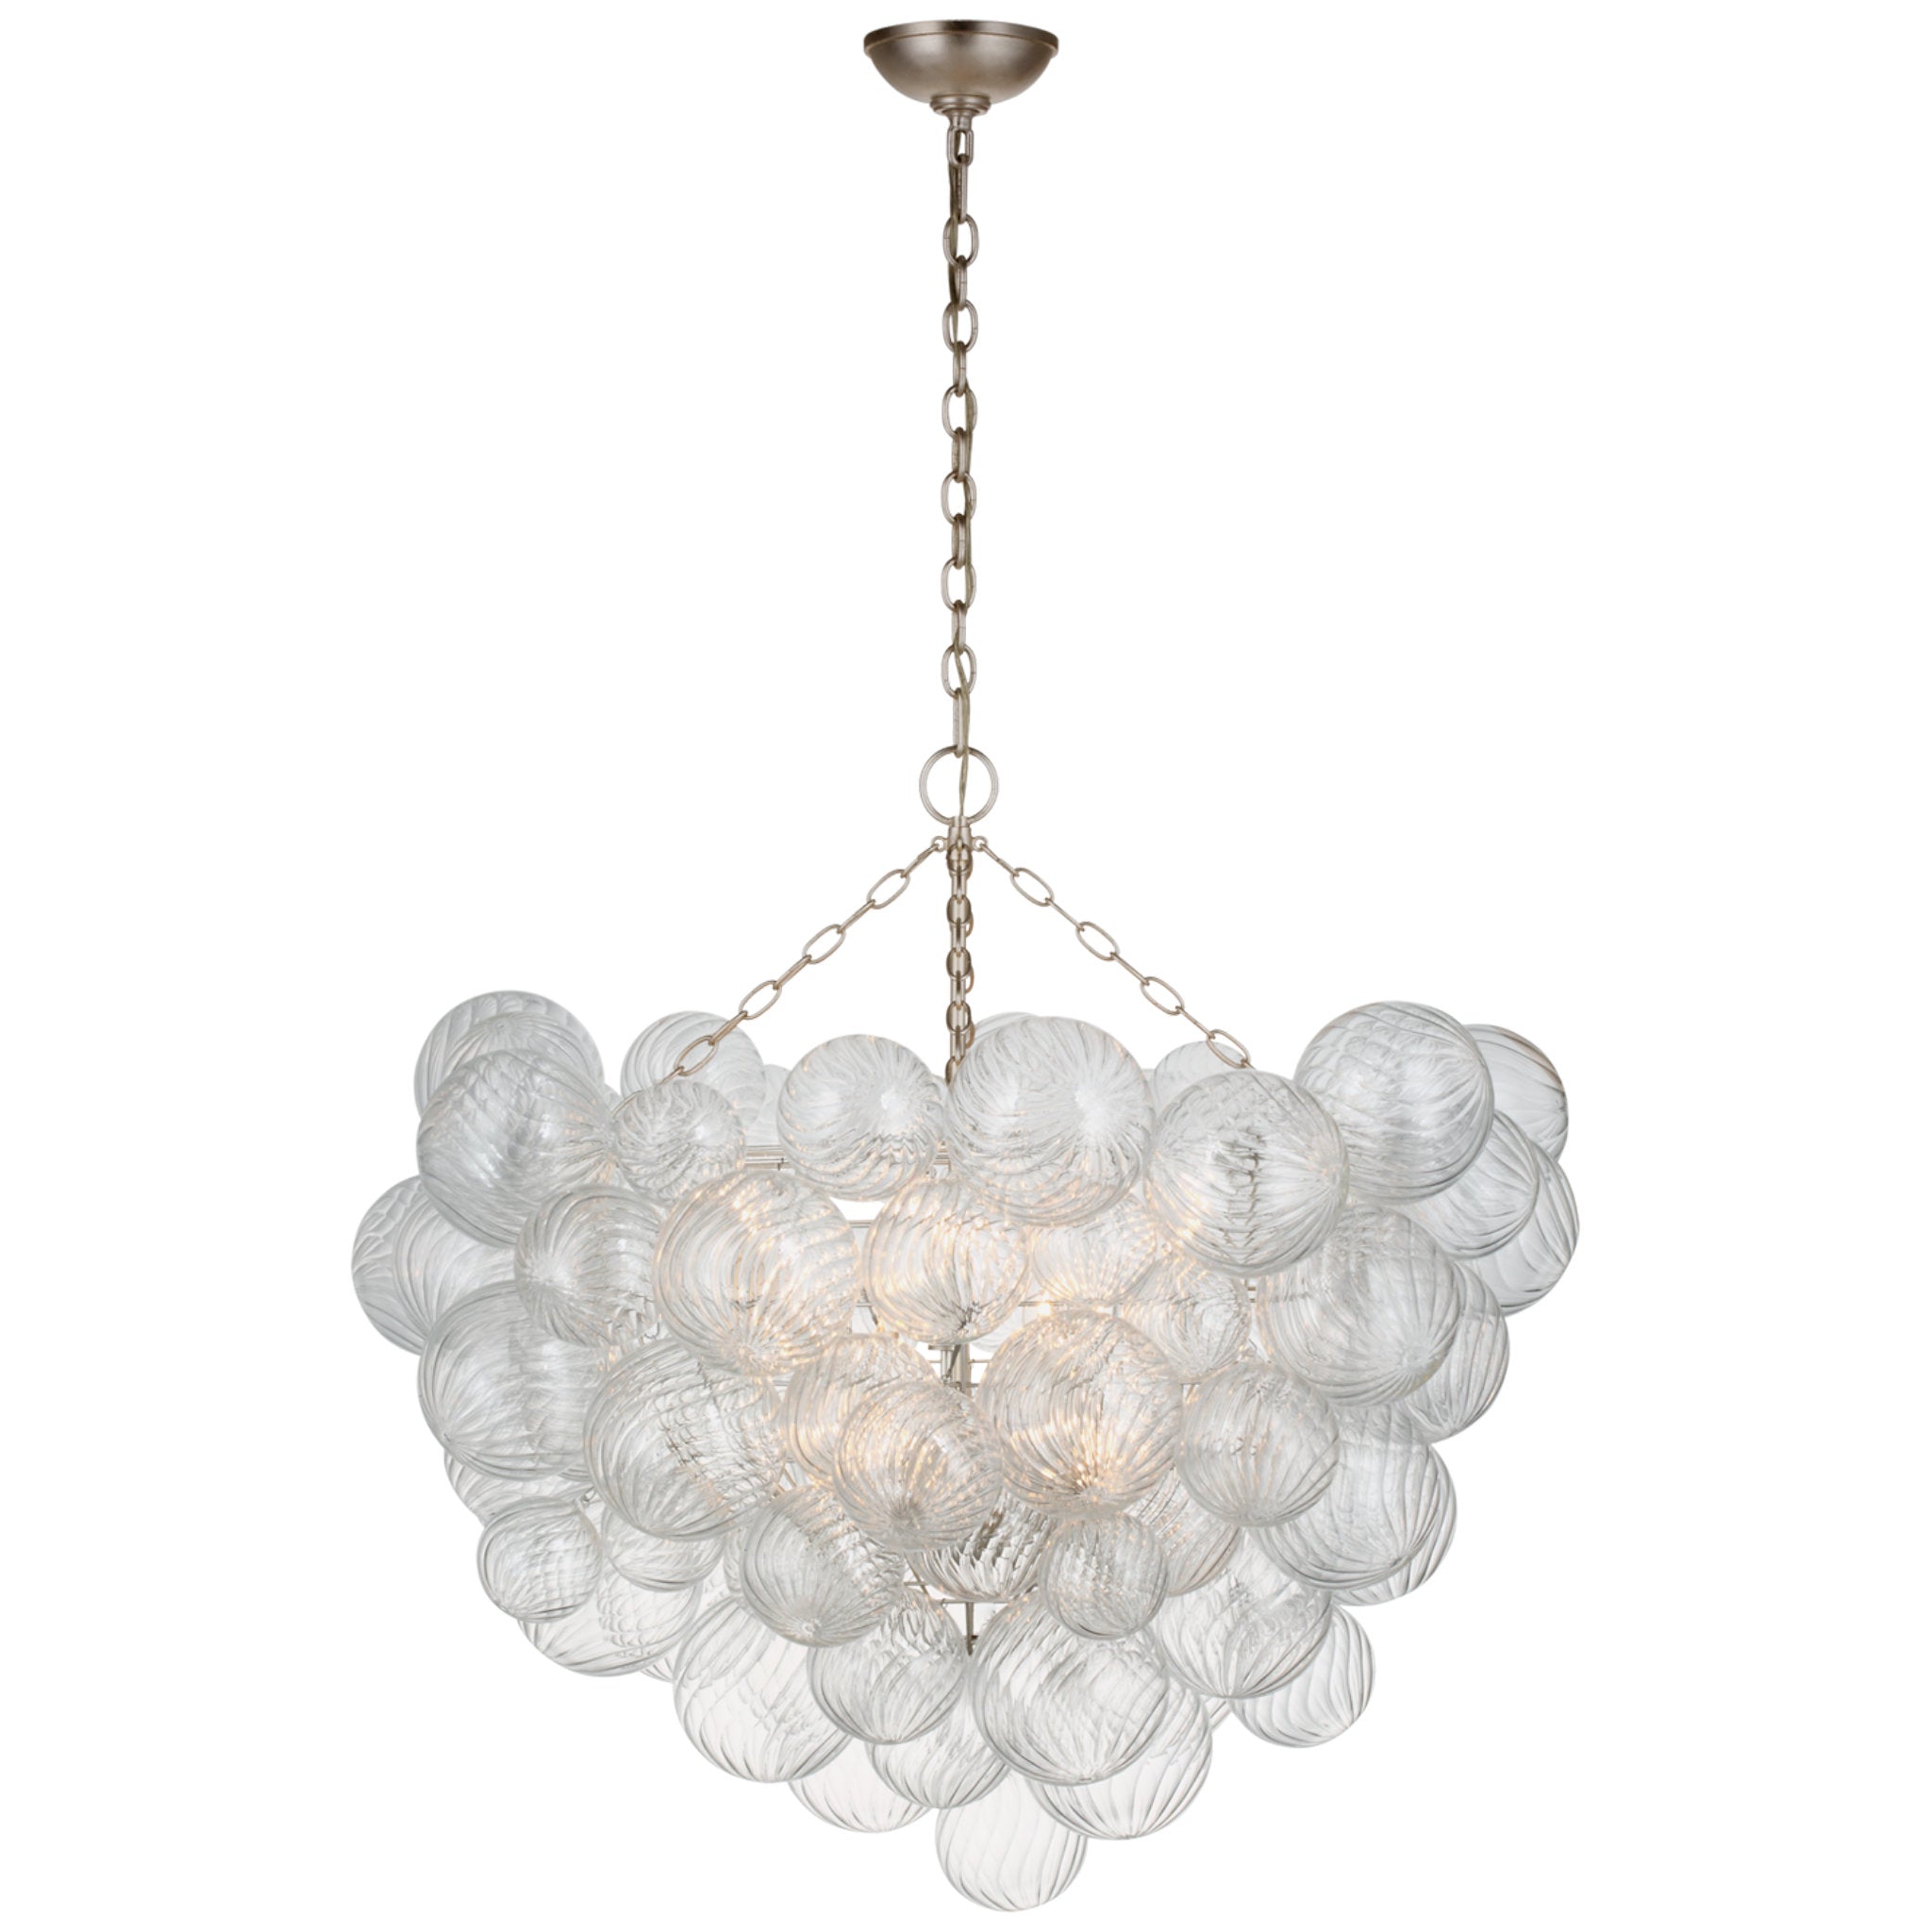 Julie Neill Talia Grande Chandelier in Burnished Silver Leaf with Clear Swirled Glass